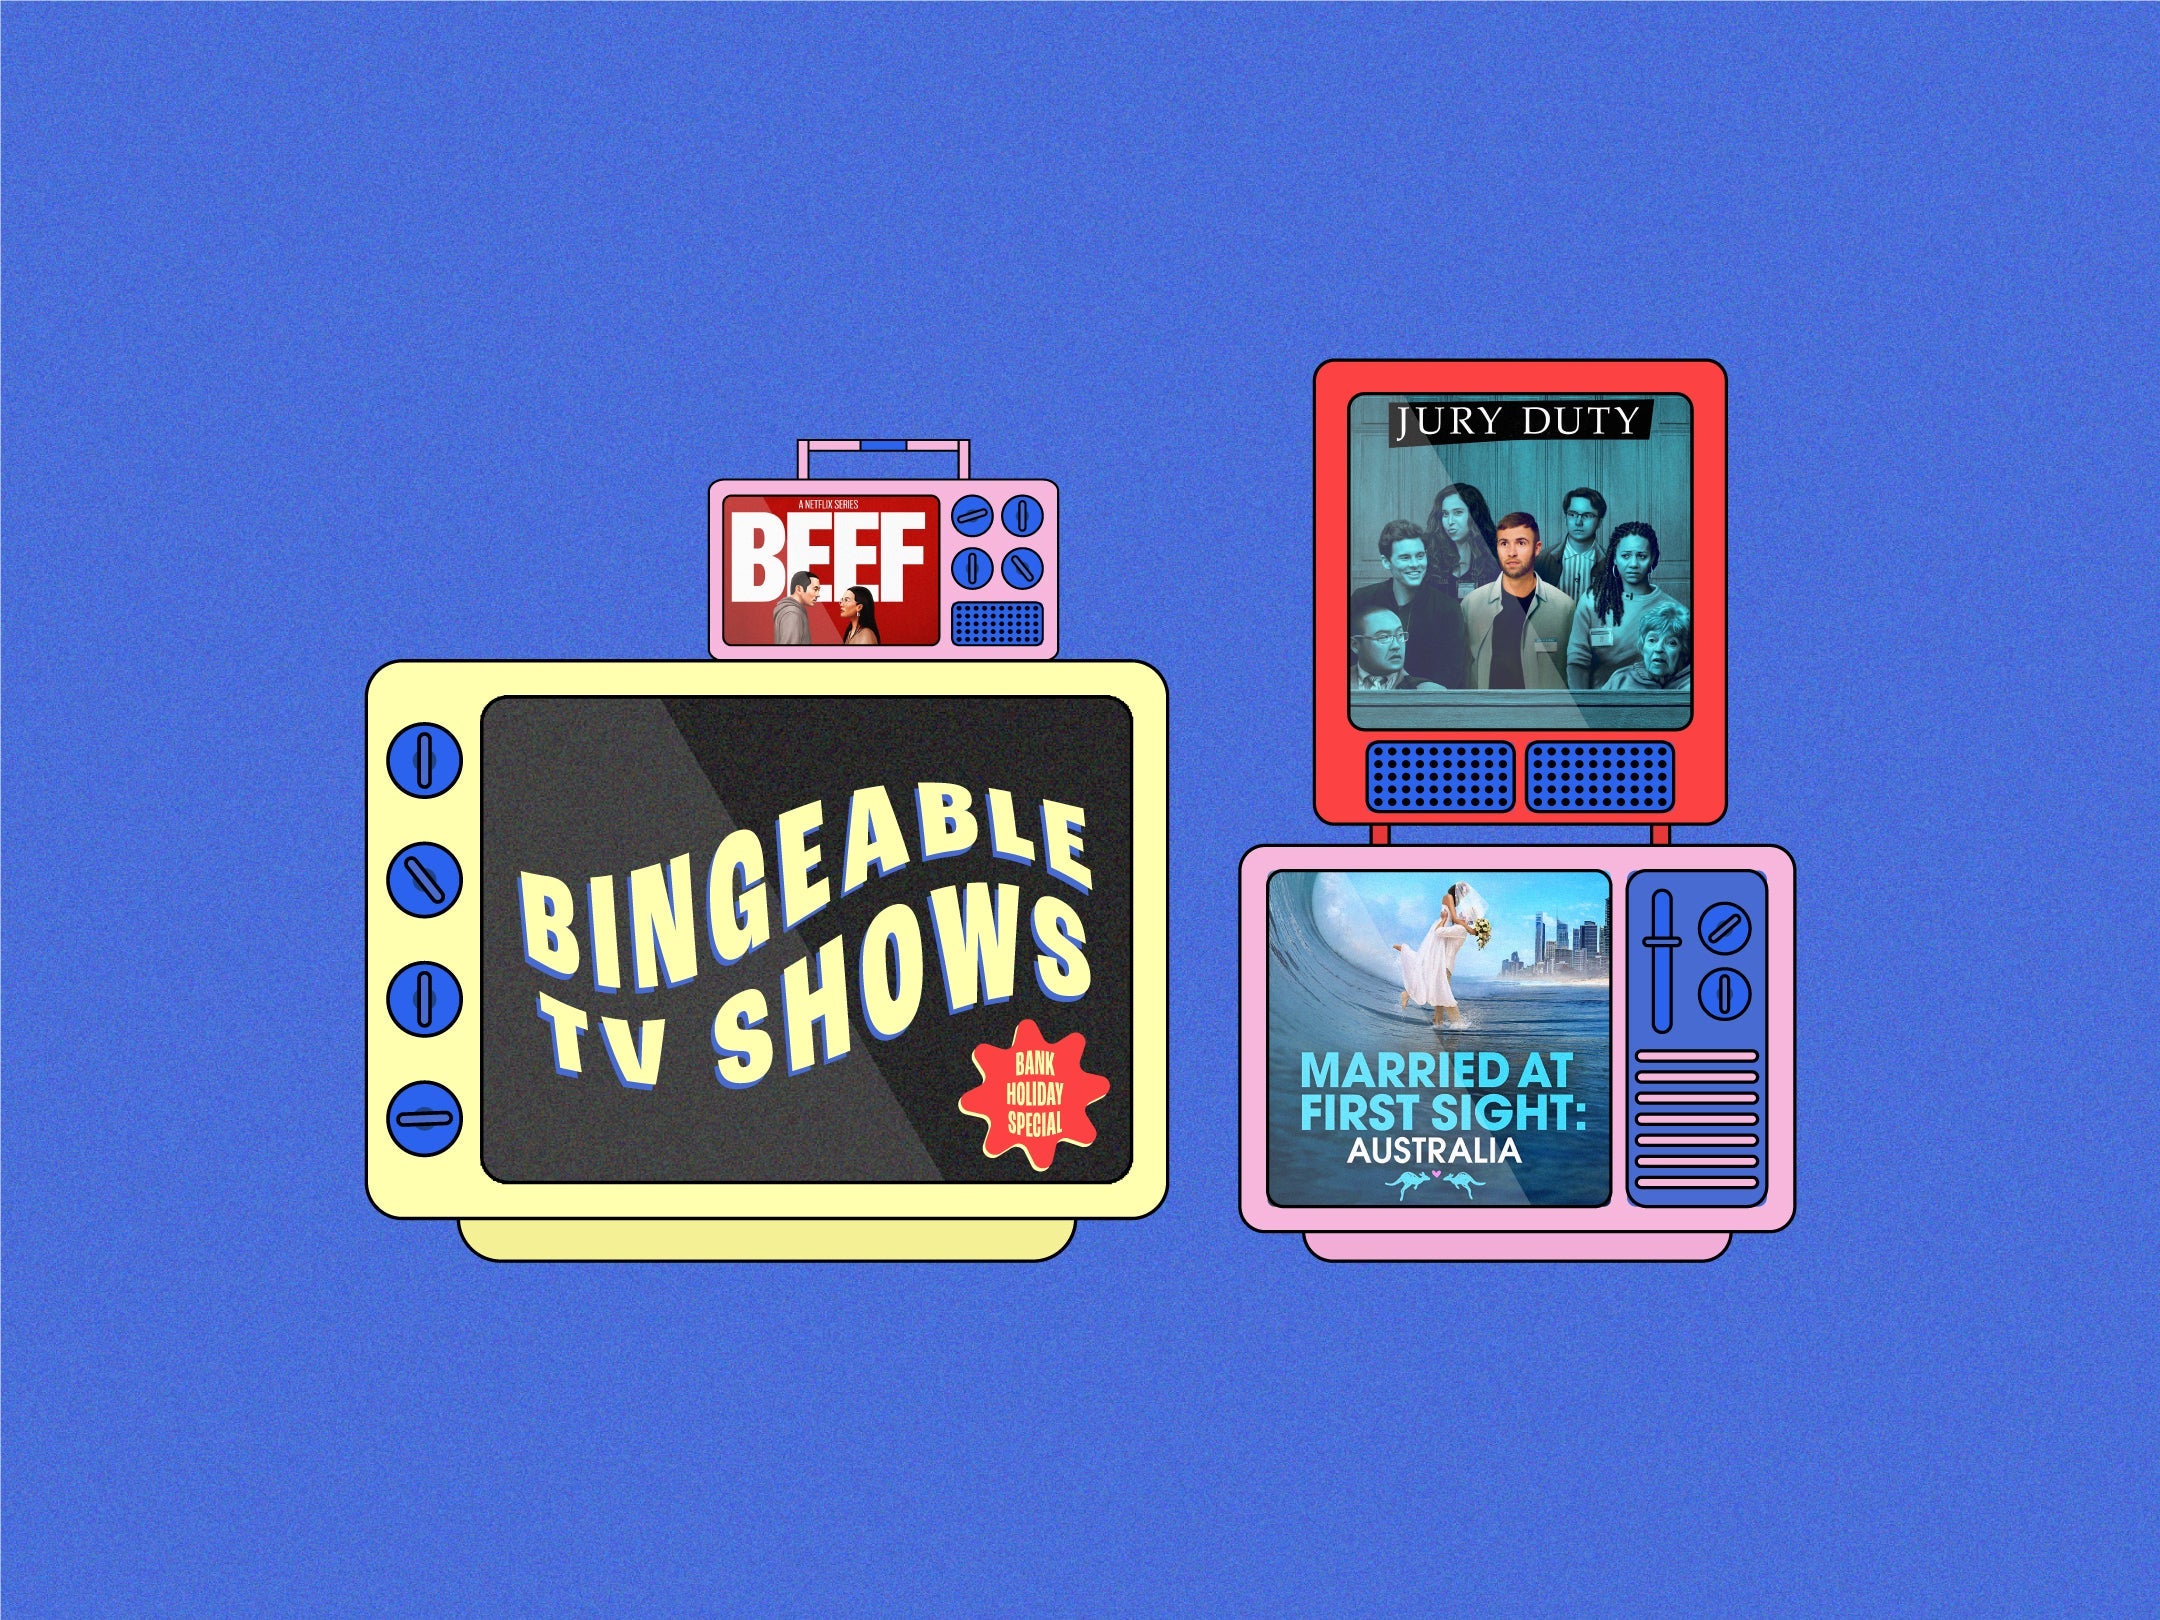 Our Top Bingeable Tv Shows Blog Posts